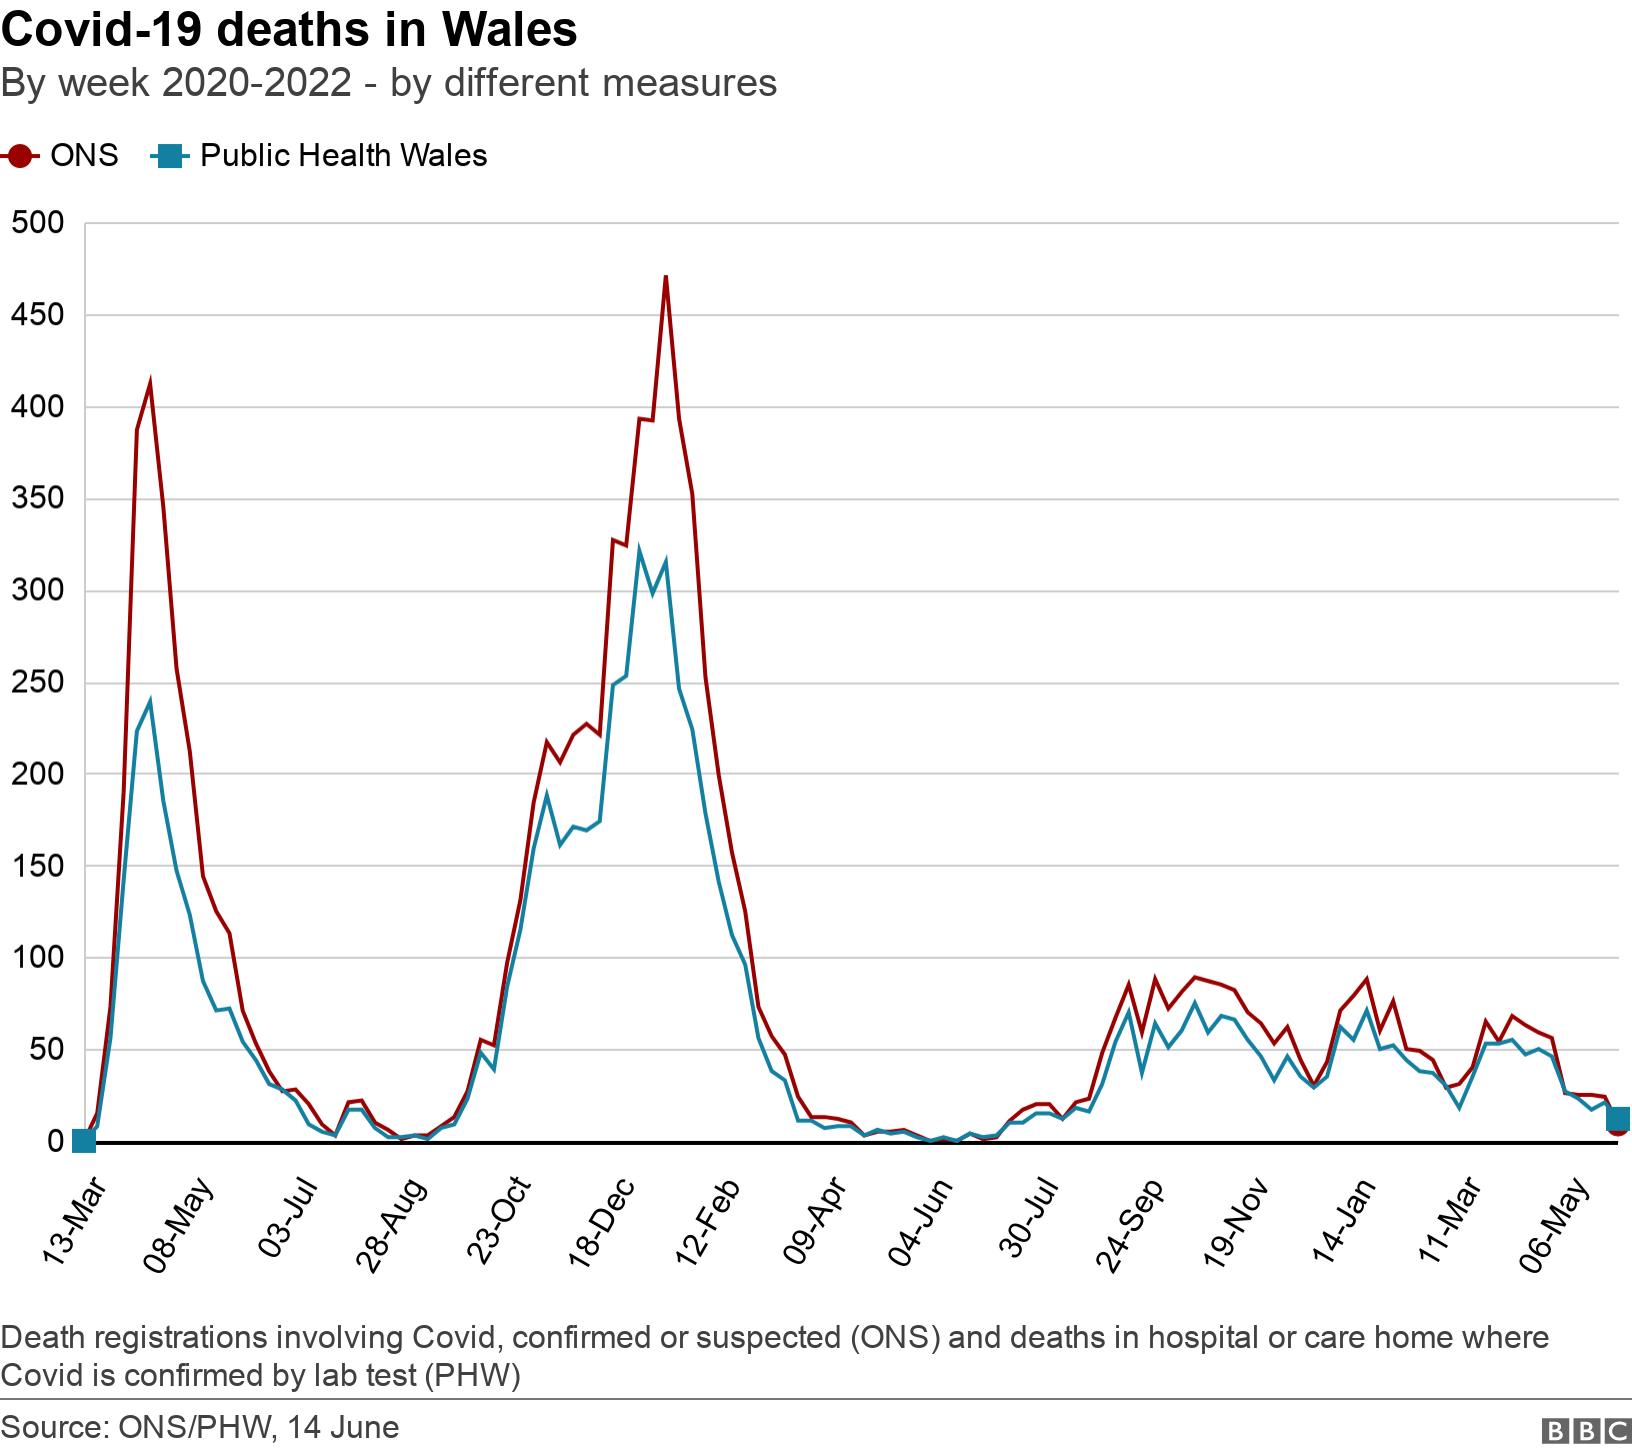 Covid-19 deaths in Wales. By week 2020-2022 - by different measures.  Death registrations involving Covid, confirmed or suspected (ONS) and deaths in hospital or care home where Covid is confirmed by lab test (PHW).